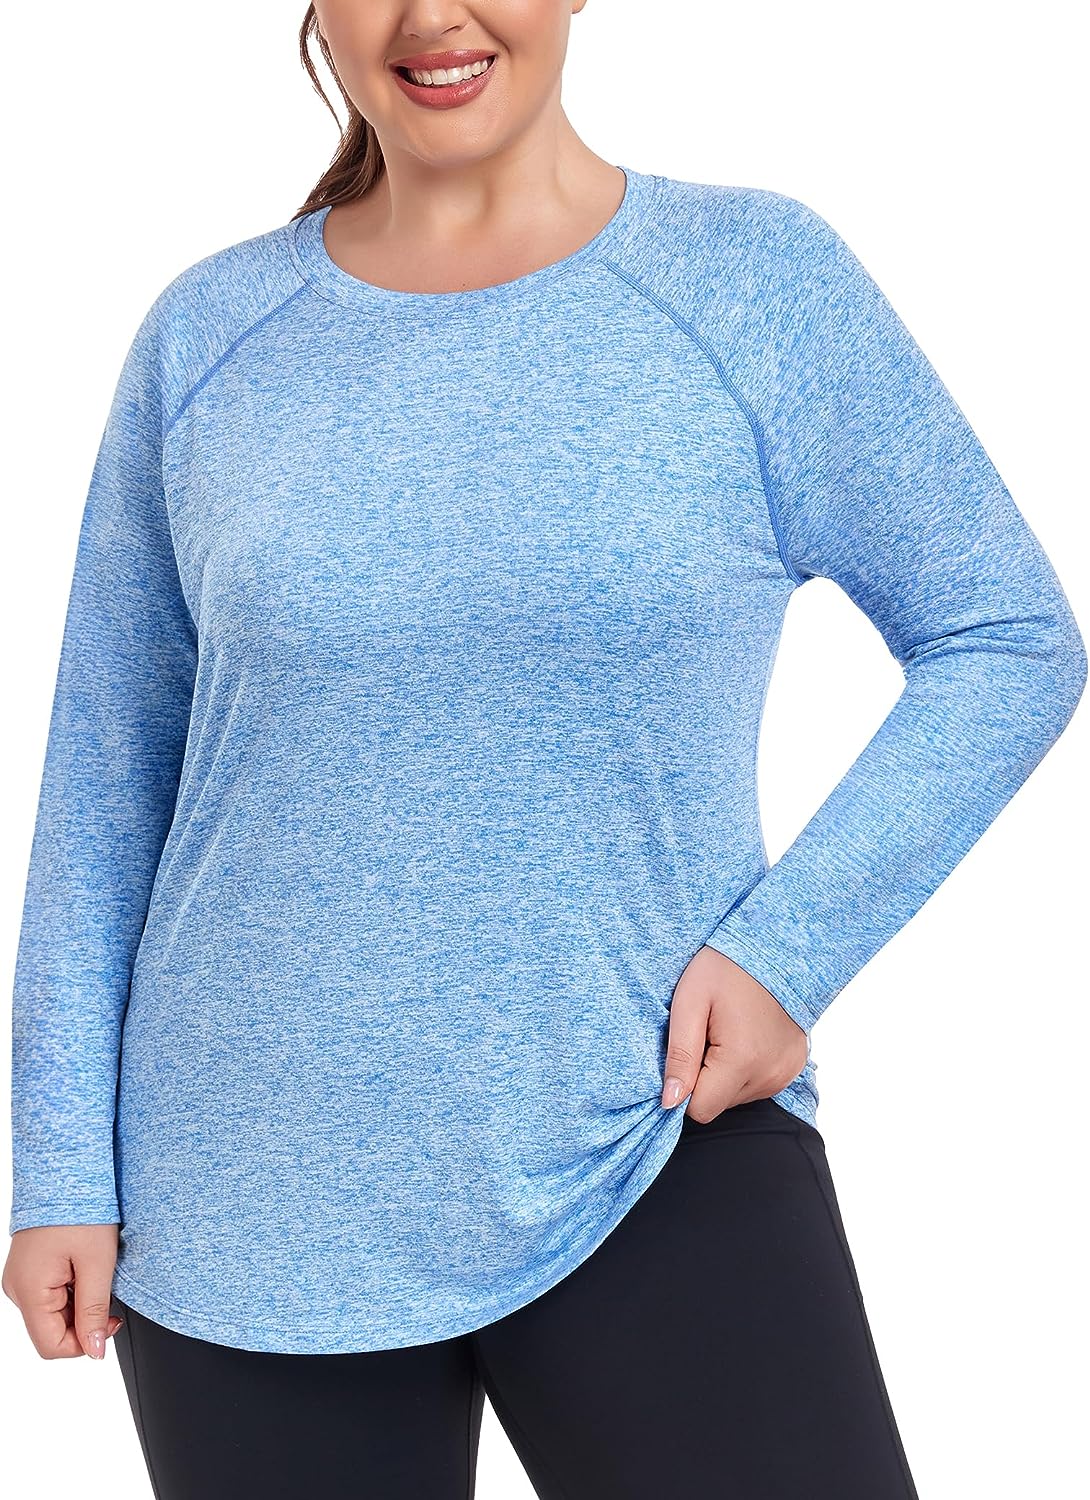 COOTRY Plus Size Workout Tops for Women Long Sleeve Loose Fit Shirts  Athletic Yo